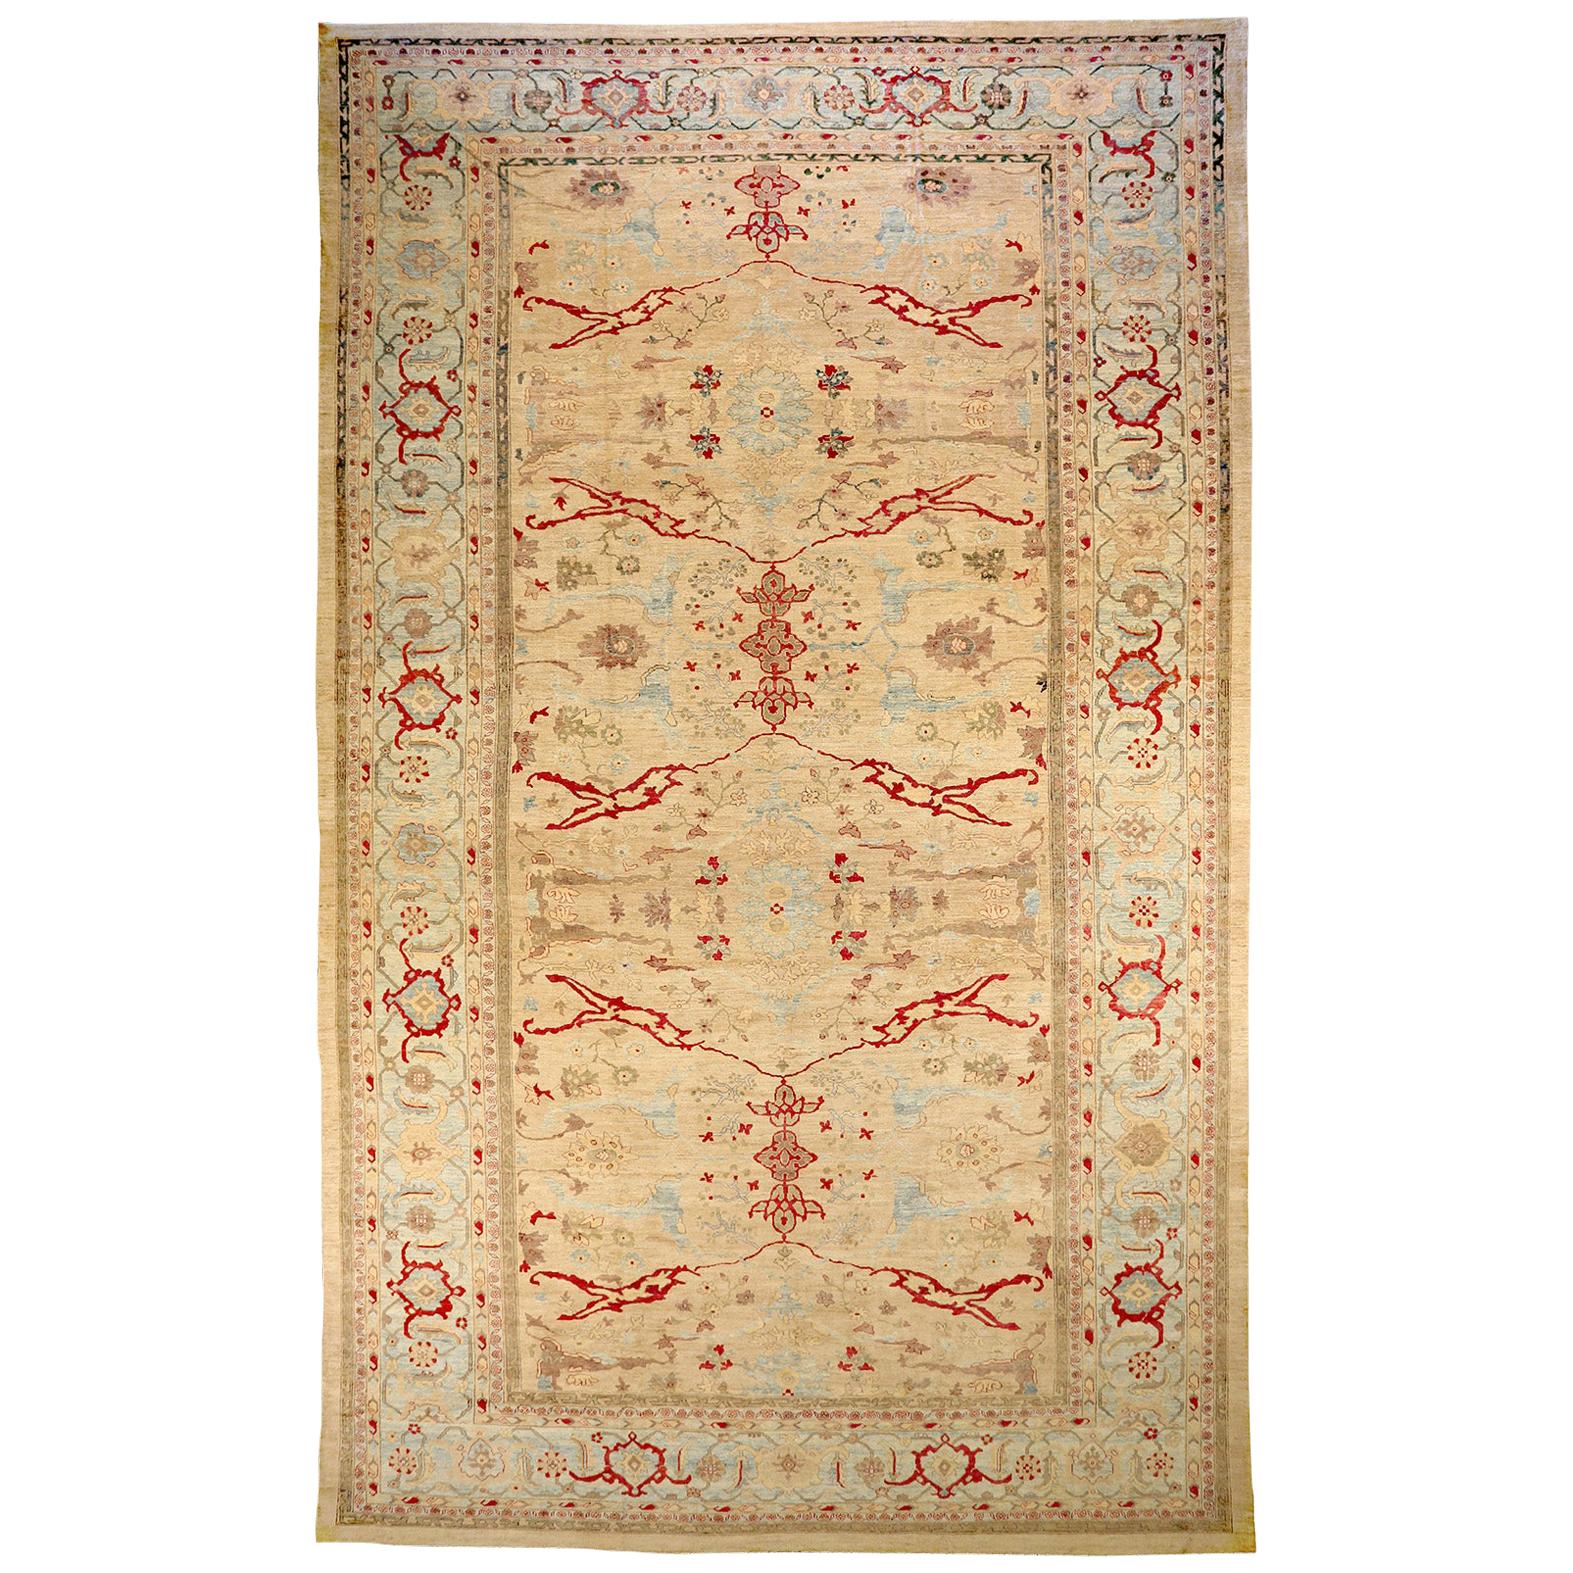 Oversize Contemporary Turkish Sultanabad Style Rug with Gray & Red Floral Motifs For Sale